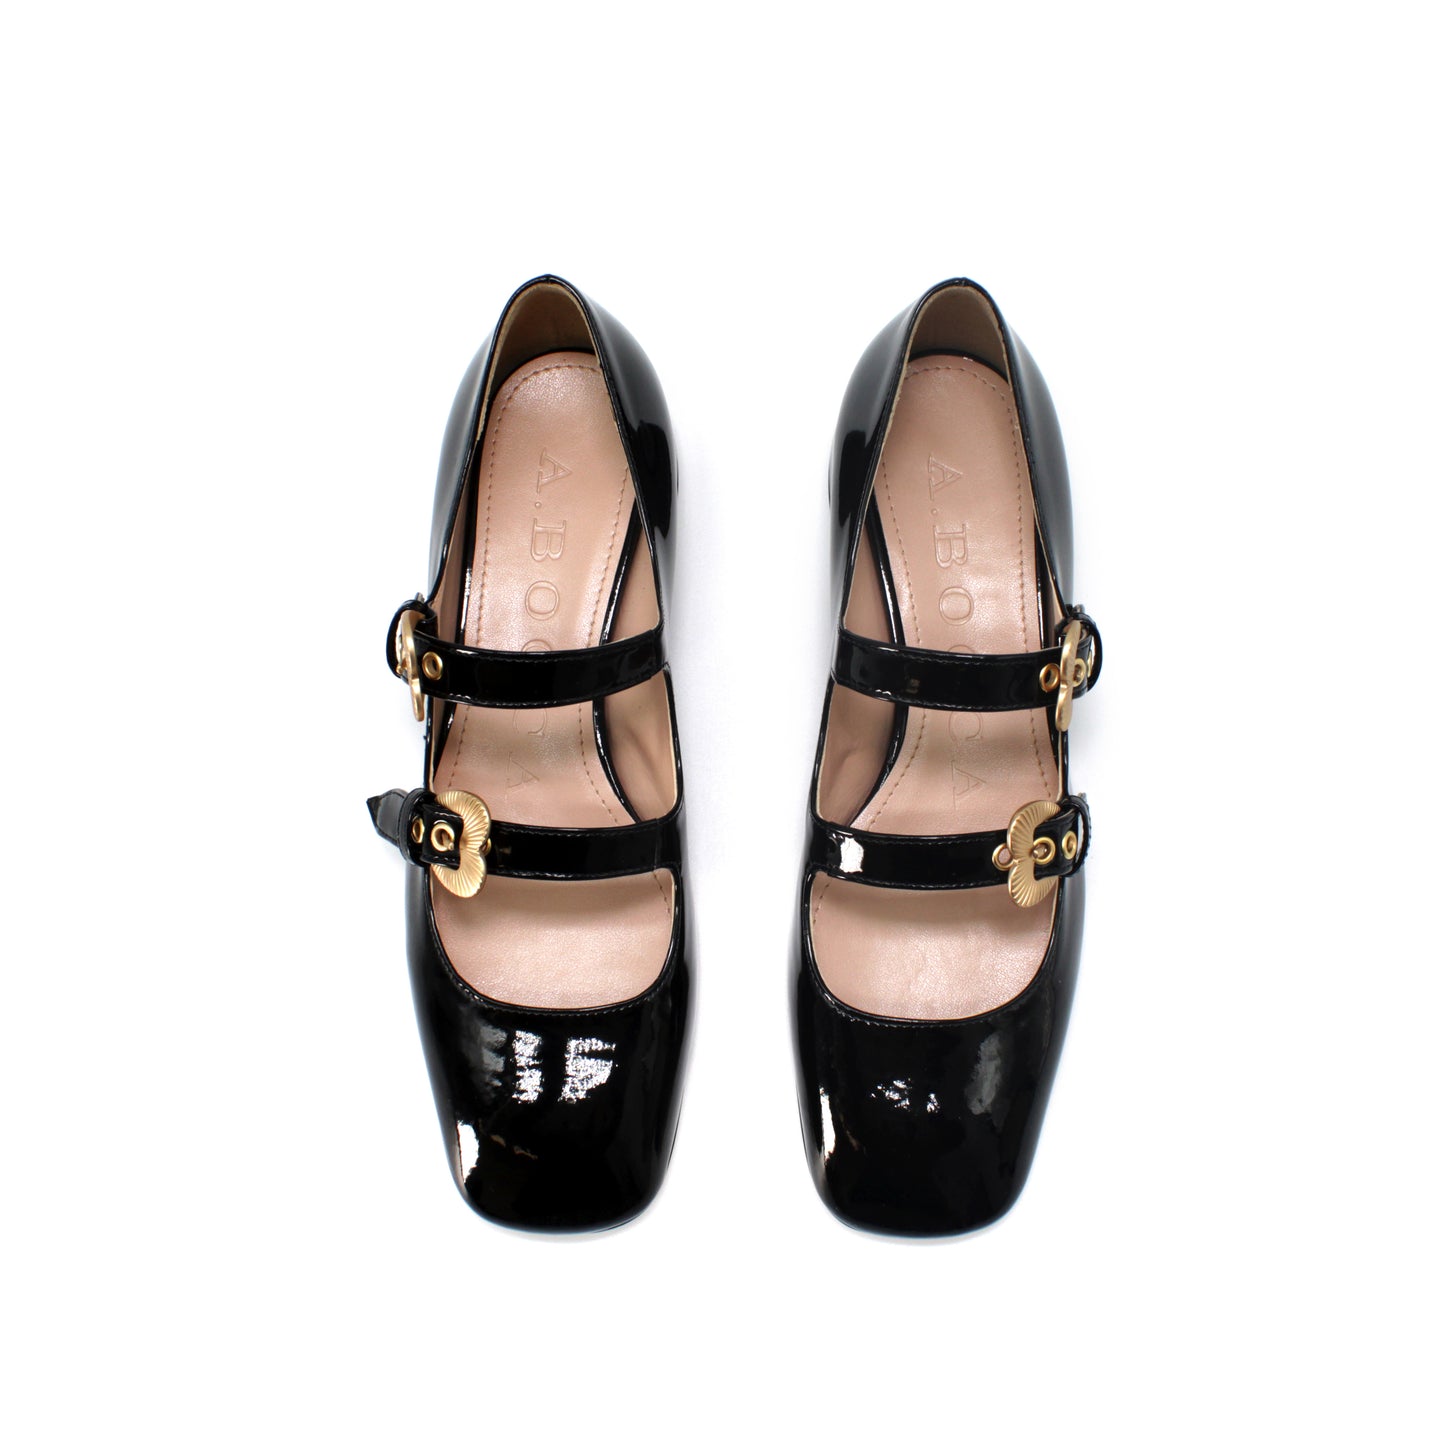 Double Strap in black-colored patent leather - VEGAN